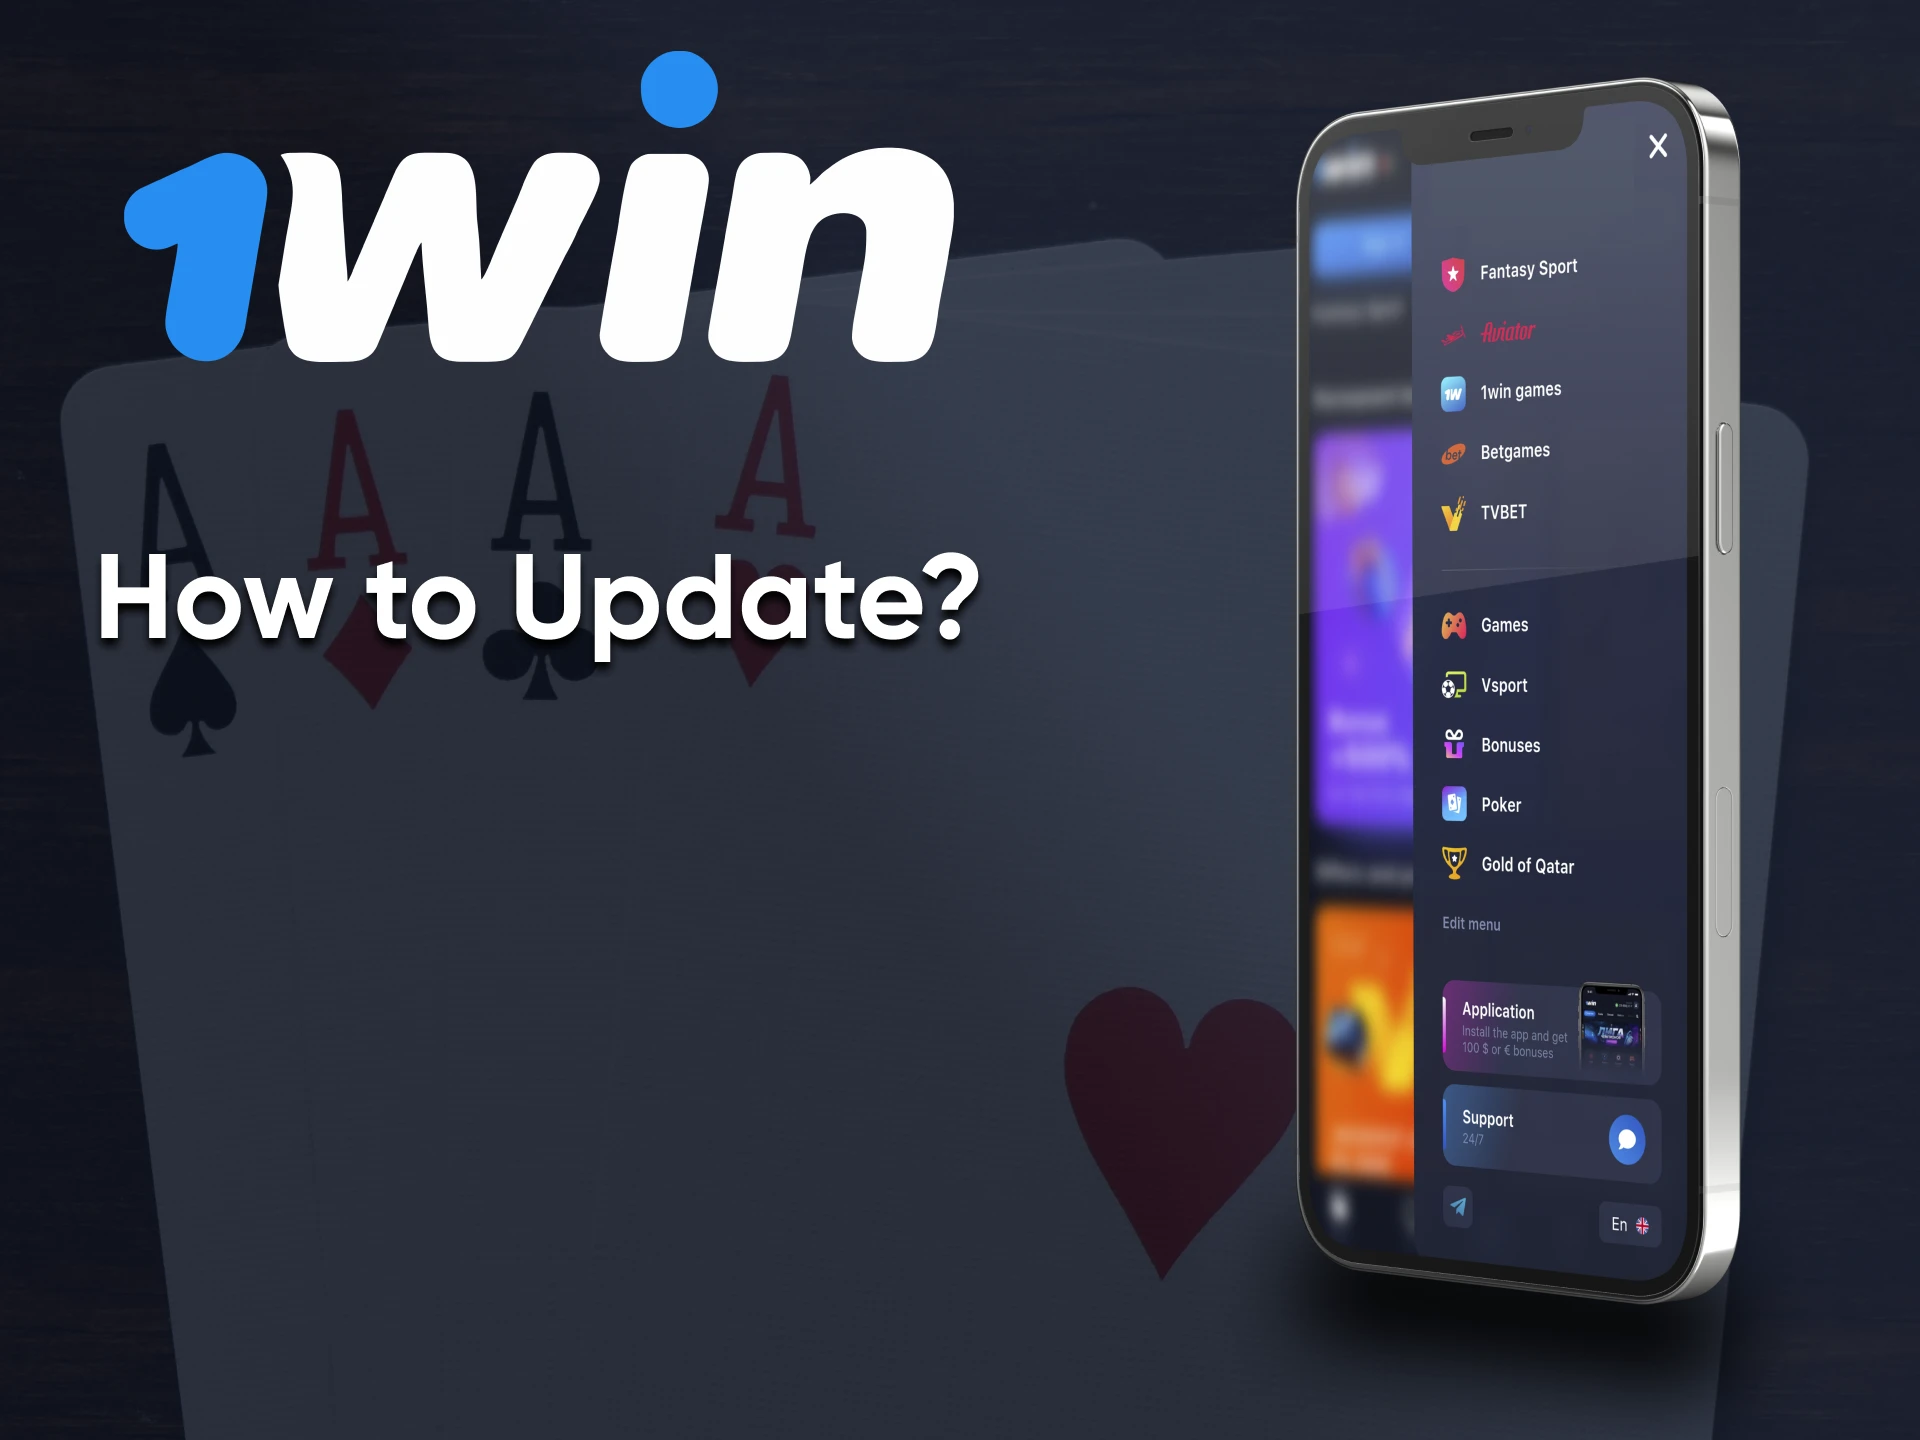 For the best performance of the application, 1win always releases updates.